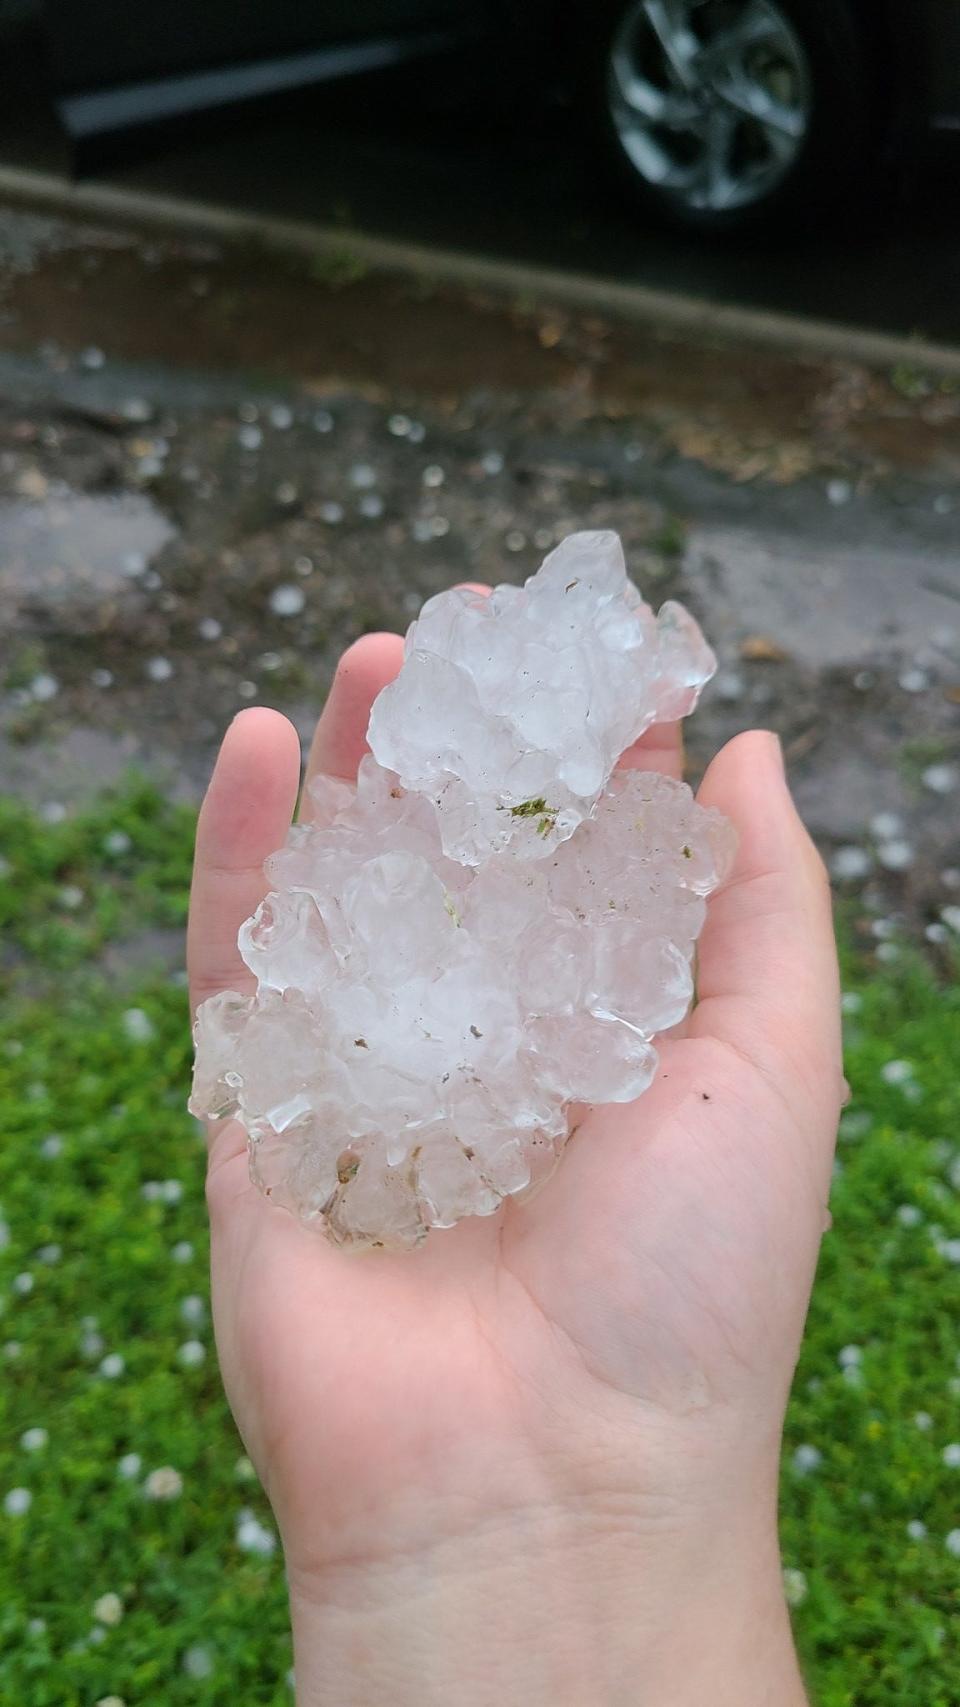 Hail in Clarksville, Tenn. The National Weather Service issued a tornado warning for Northwestern Montgomery on Wednesday, May 8.